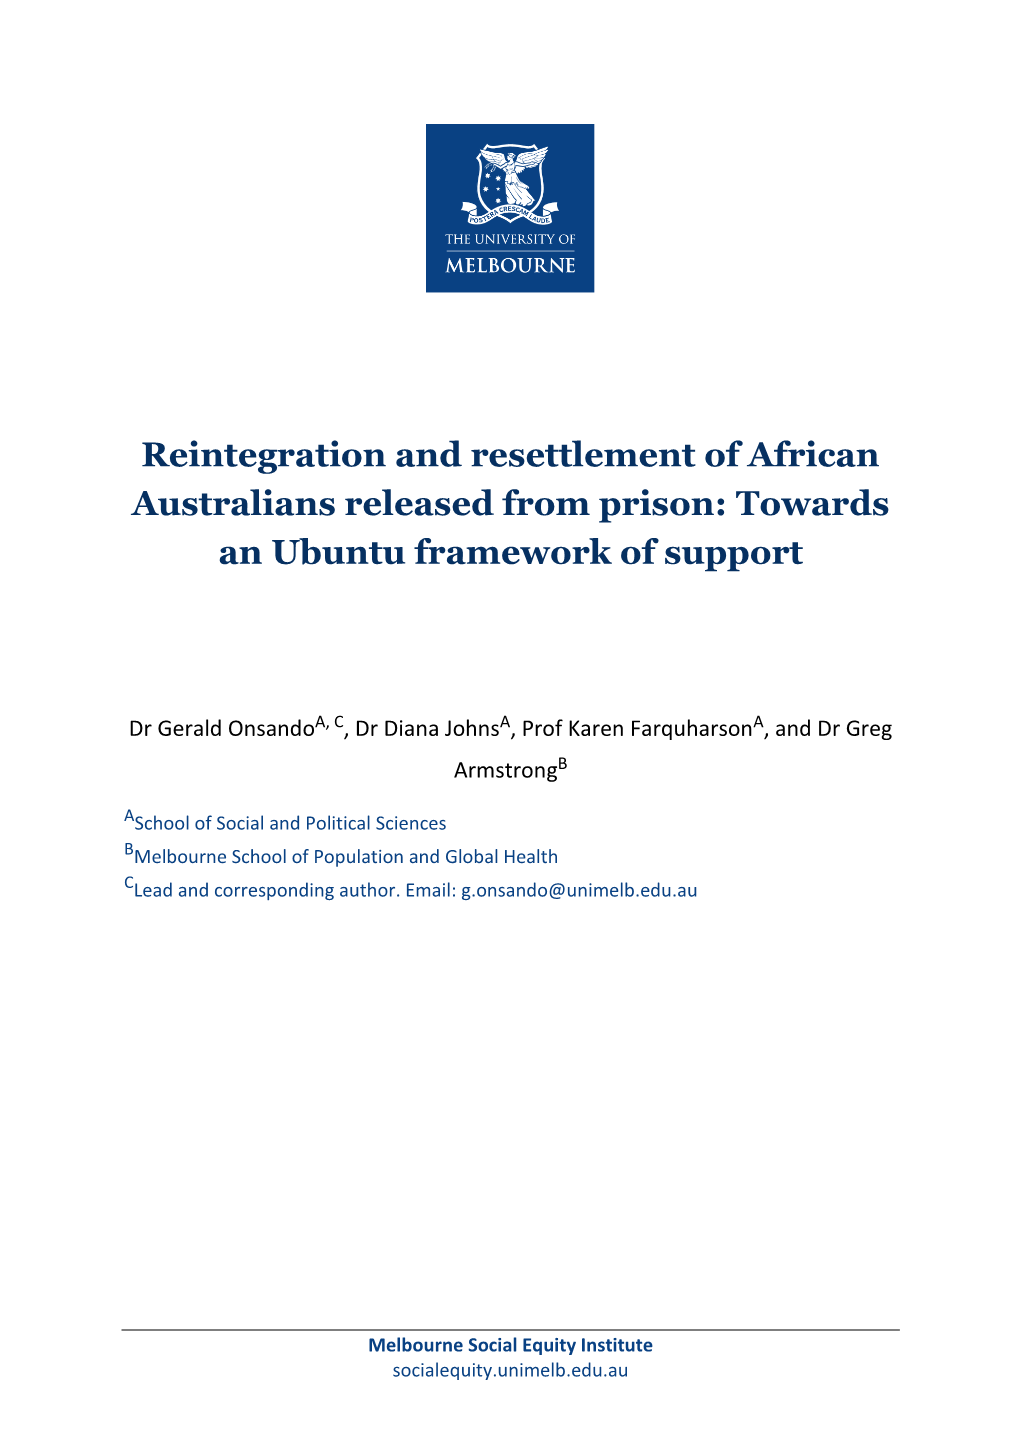 Reintegration and Resettlement of African Australians Released from Prison: Towards an Ubuntu Framework of Support